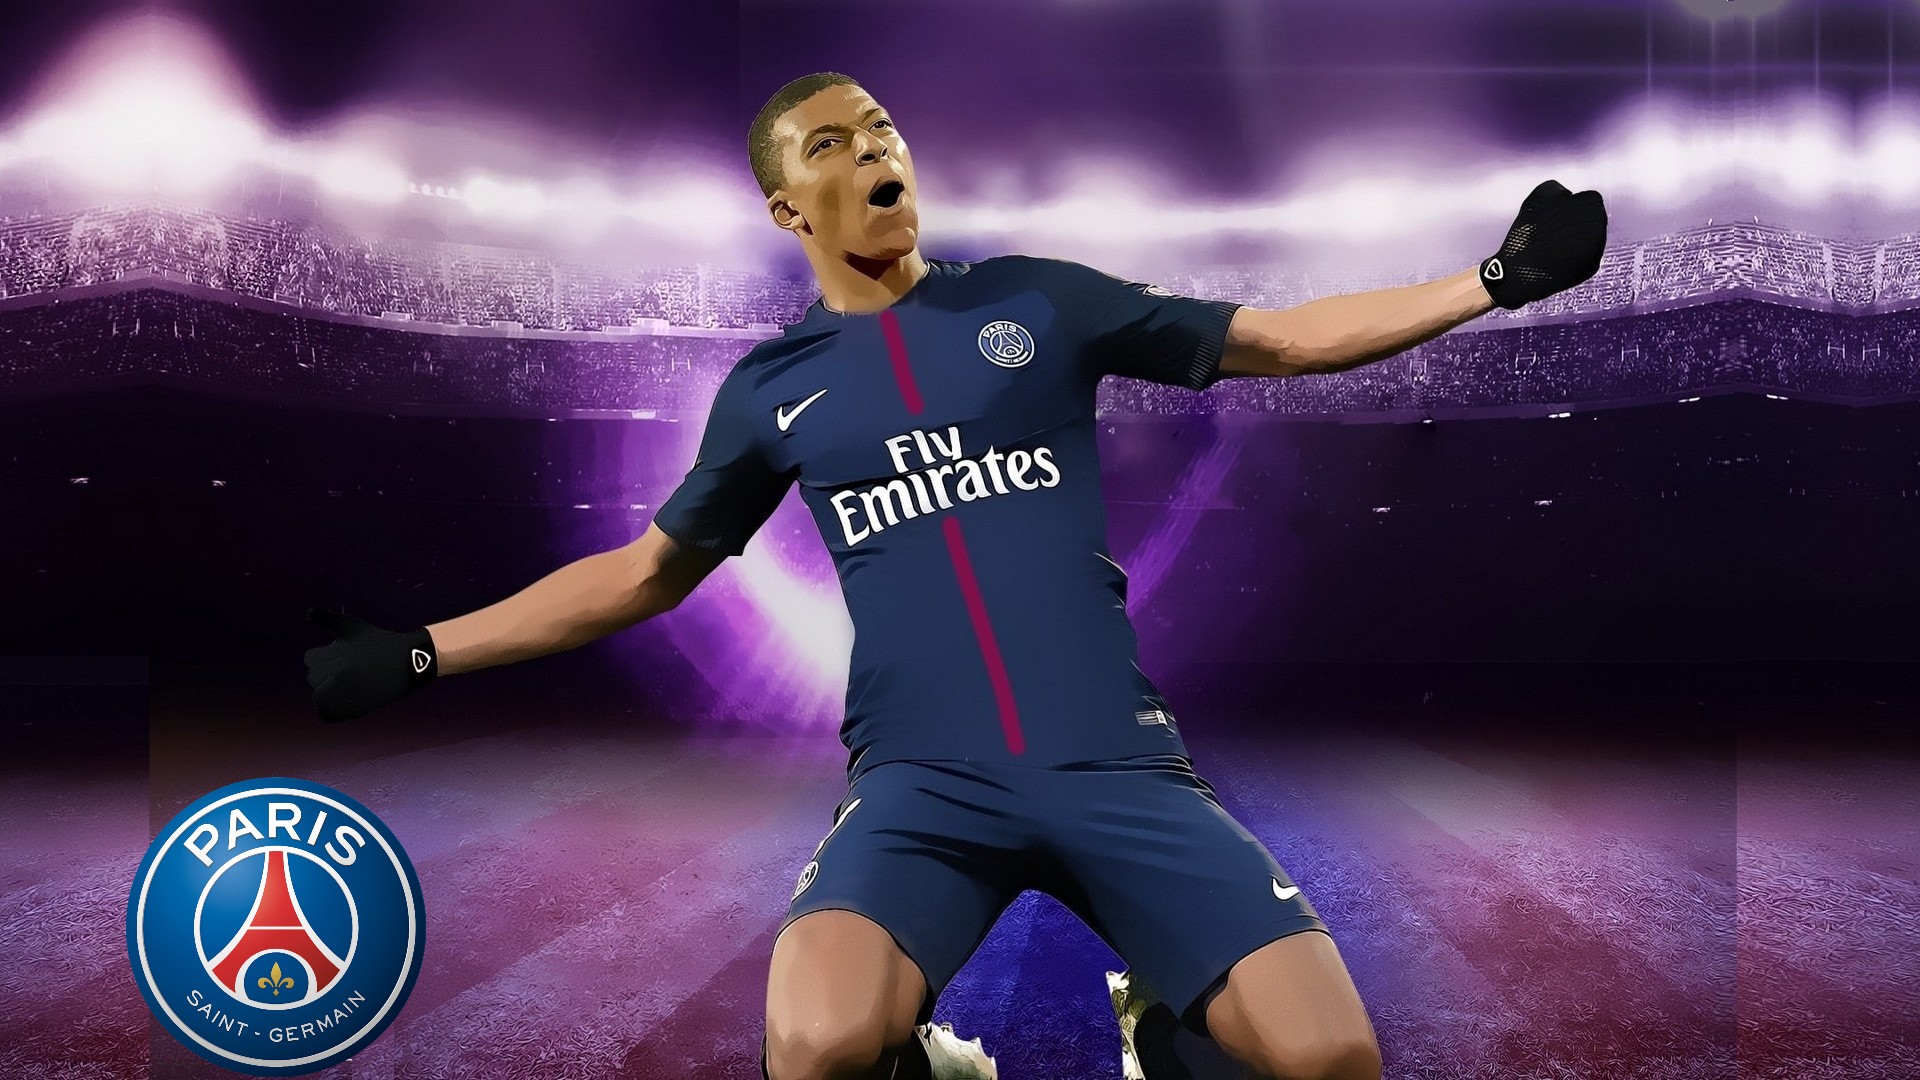 PSG Kylian Mbappe Wallpaper HD With Resolution 1920X1080 pixel. You can make this wallpaper for your Mac or Windows Desktop Background, iPhone, Android or Tablet and another Smartphone device for free